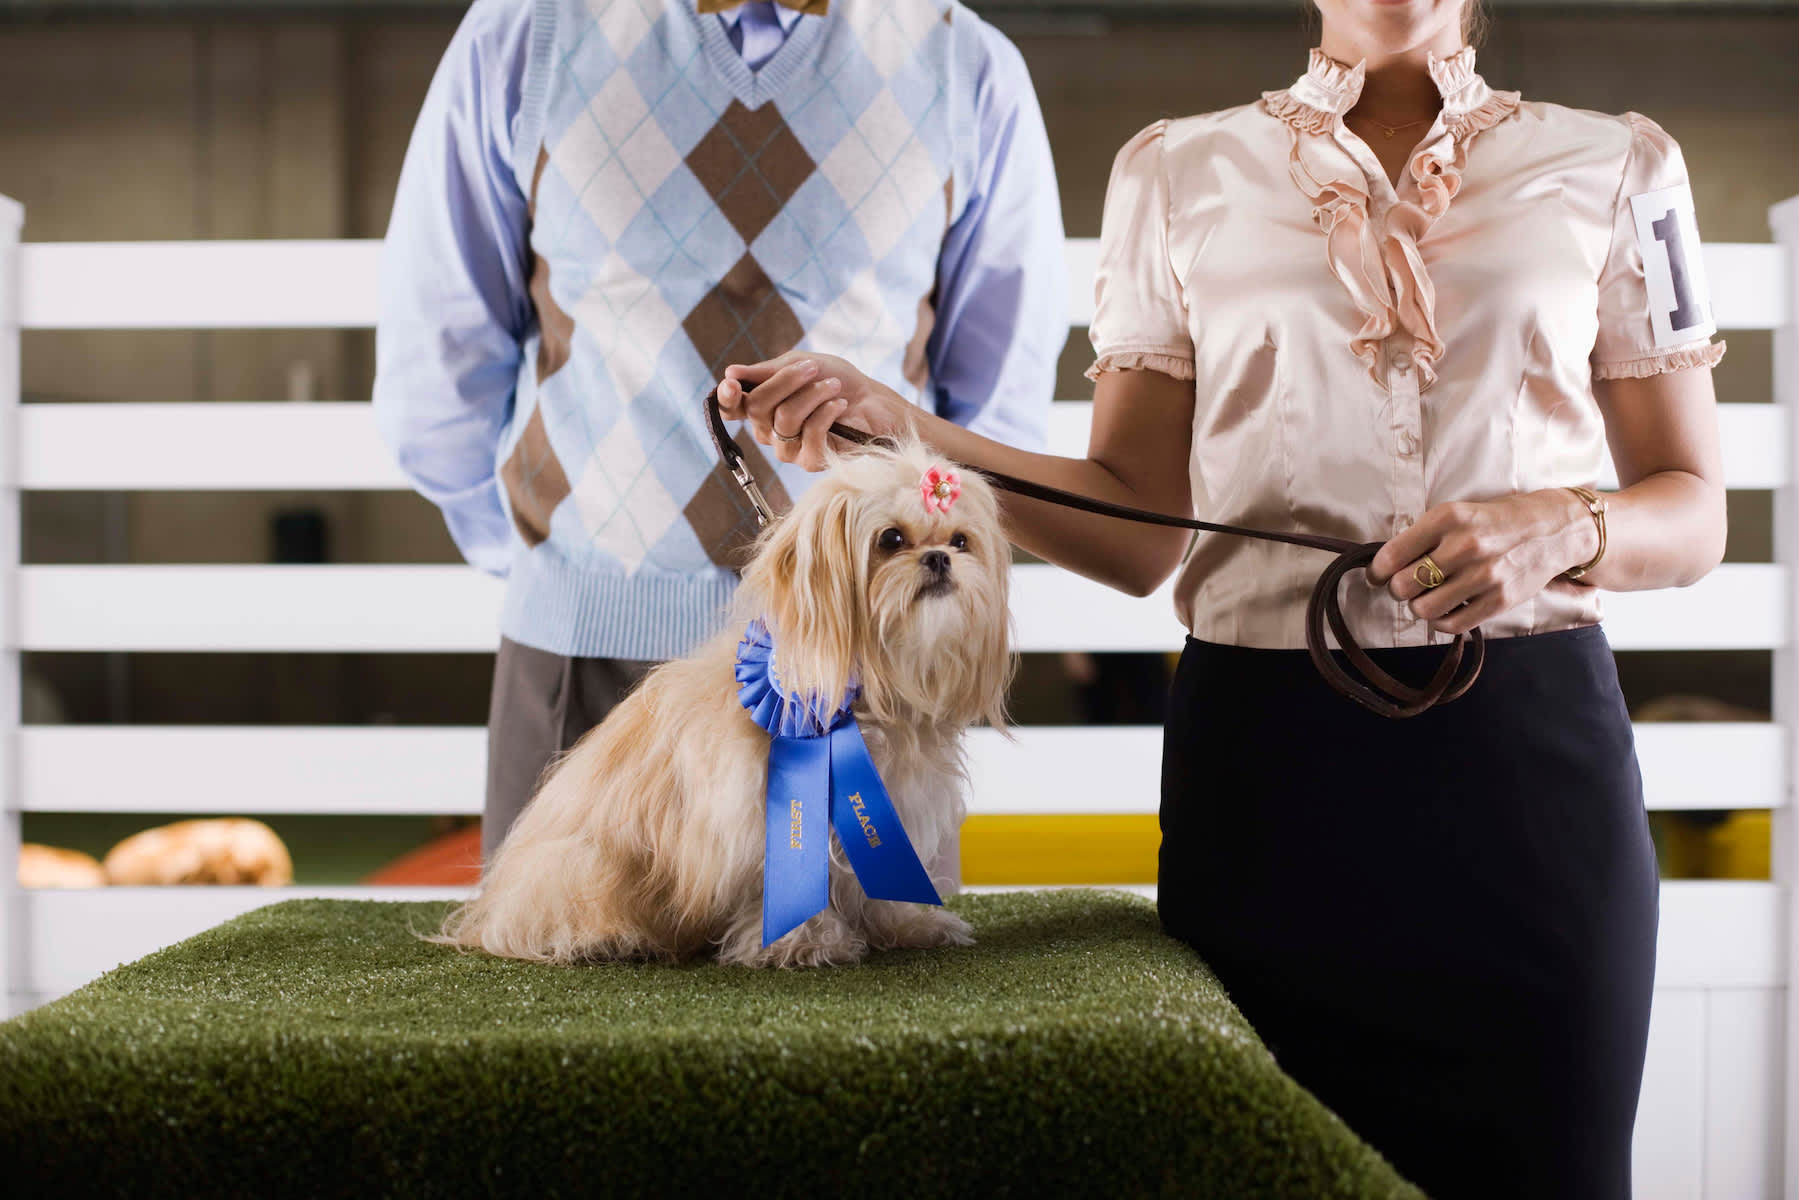 Canva - Couple with dog at a dog show